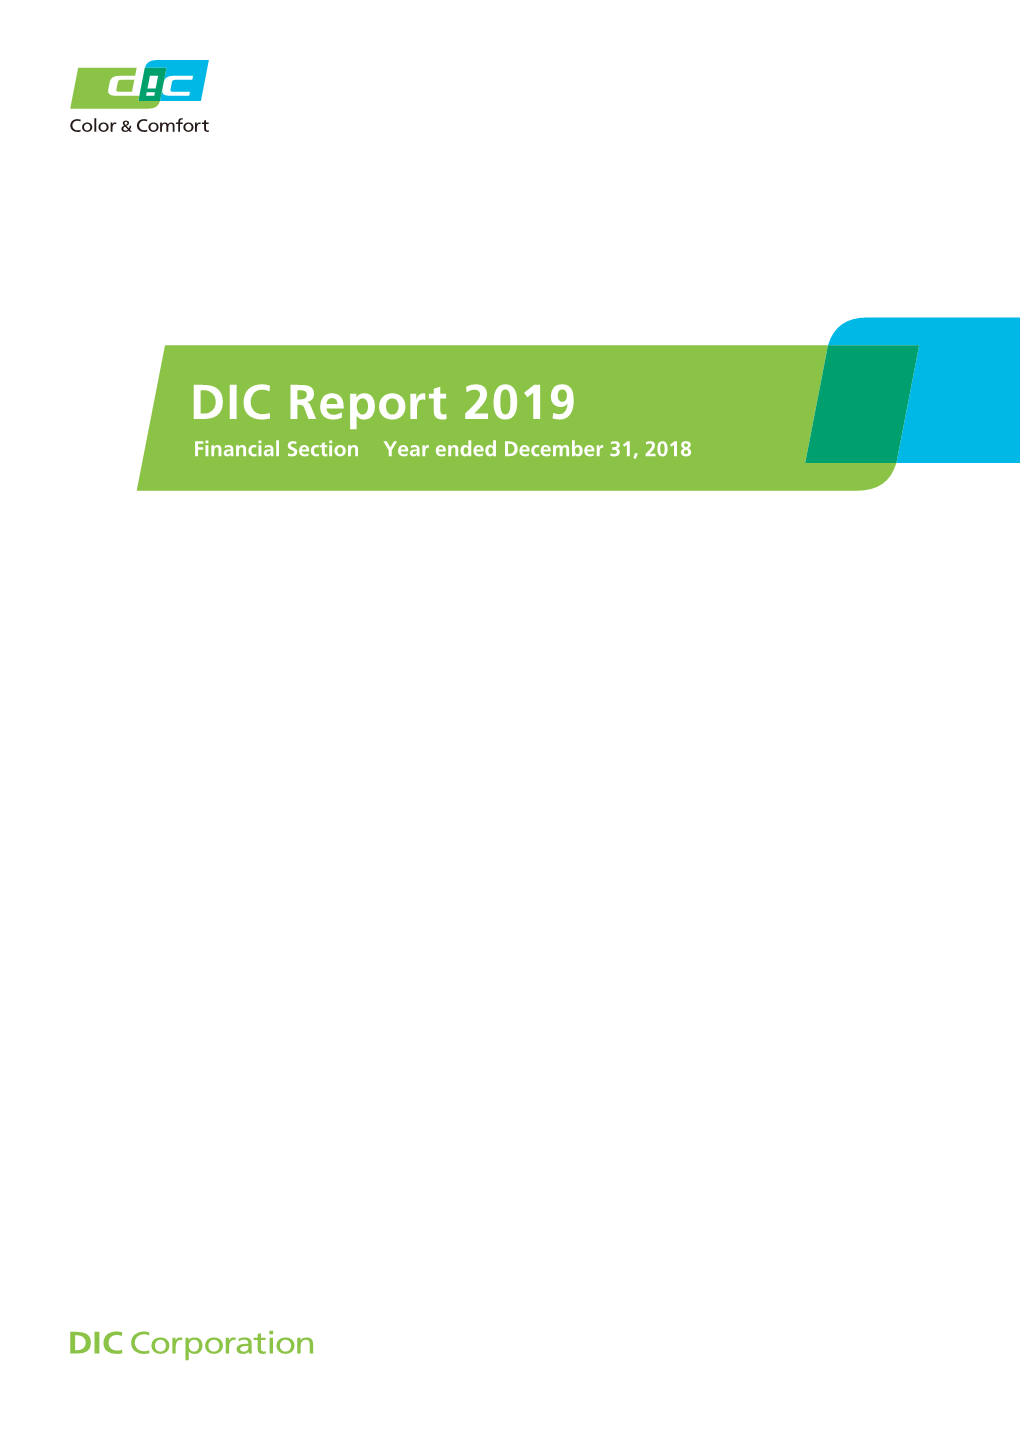 DIC Report 2019-Financial Section (Year Ended December 31, 2018)